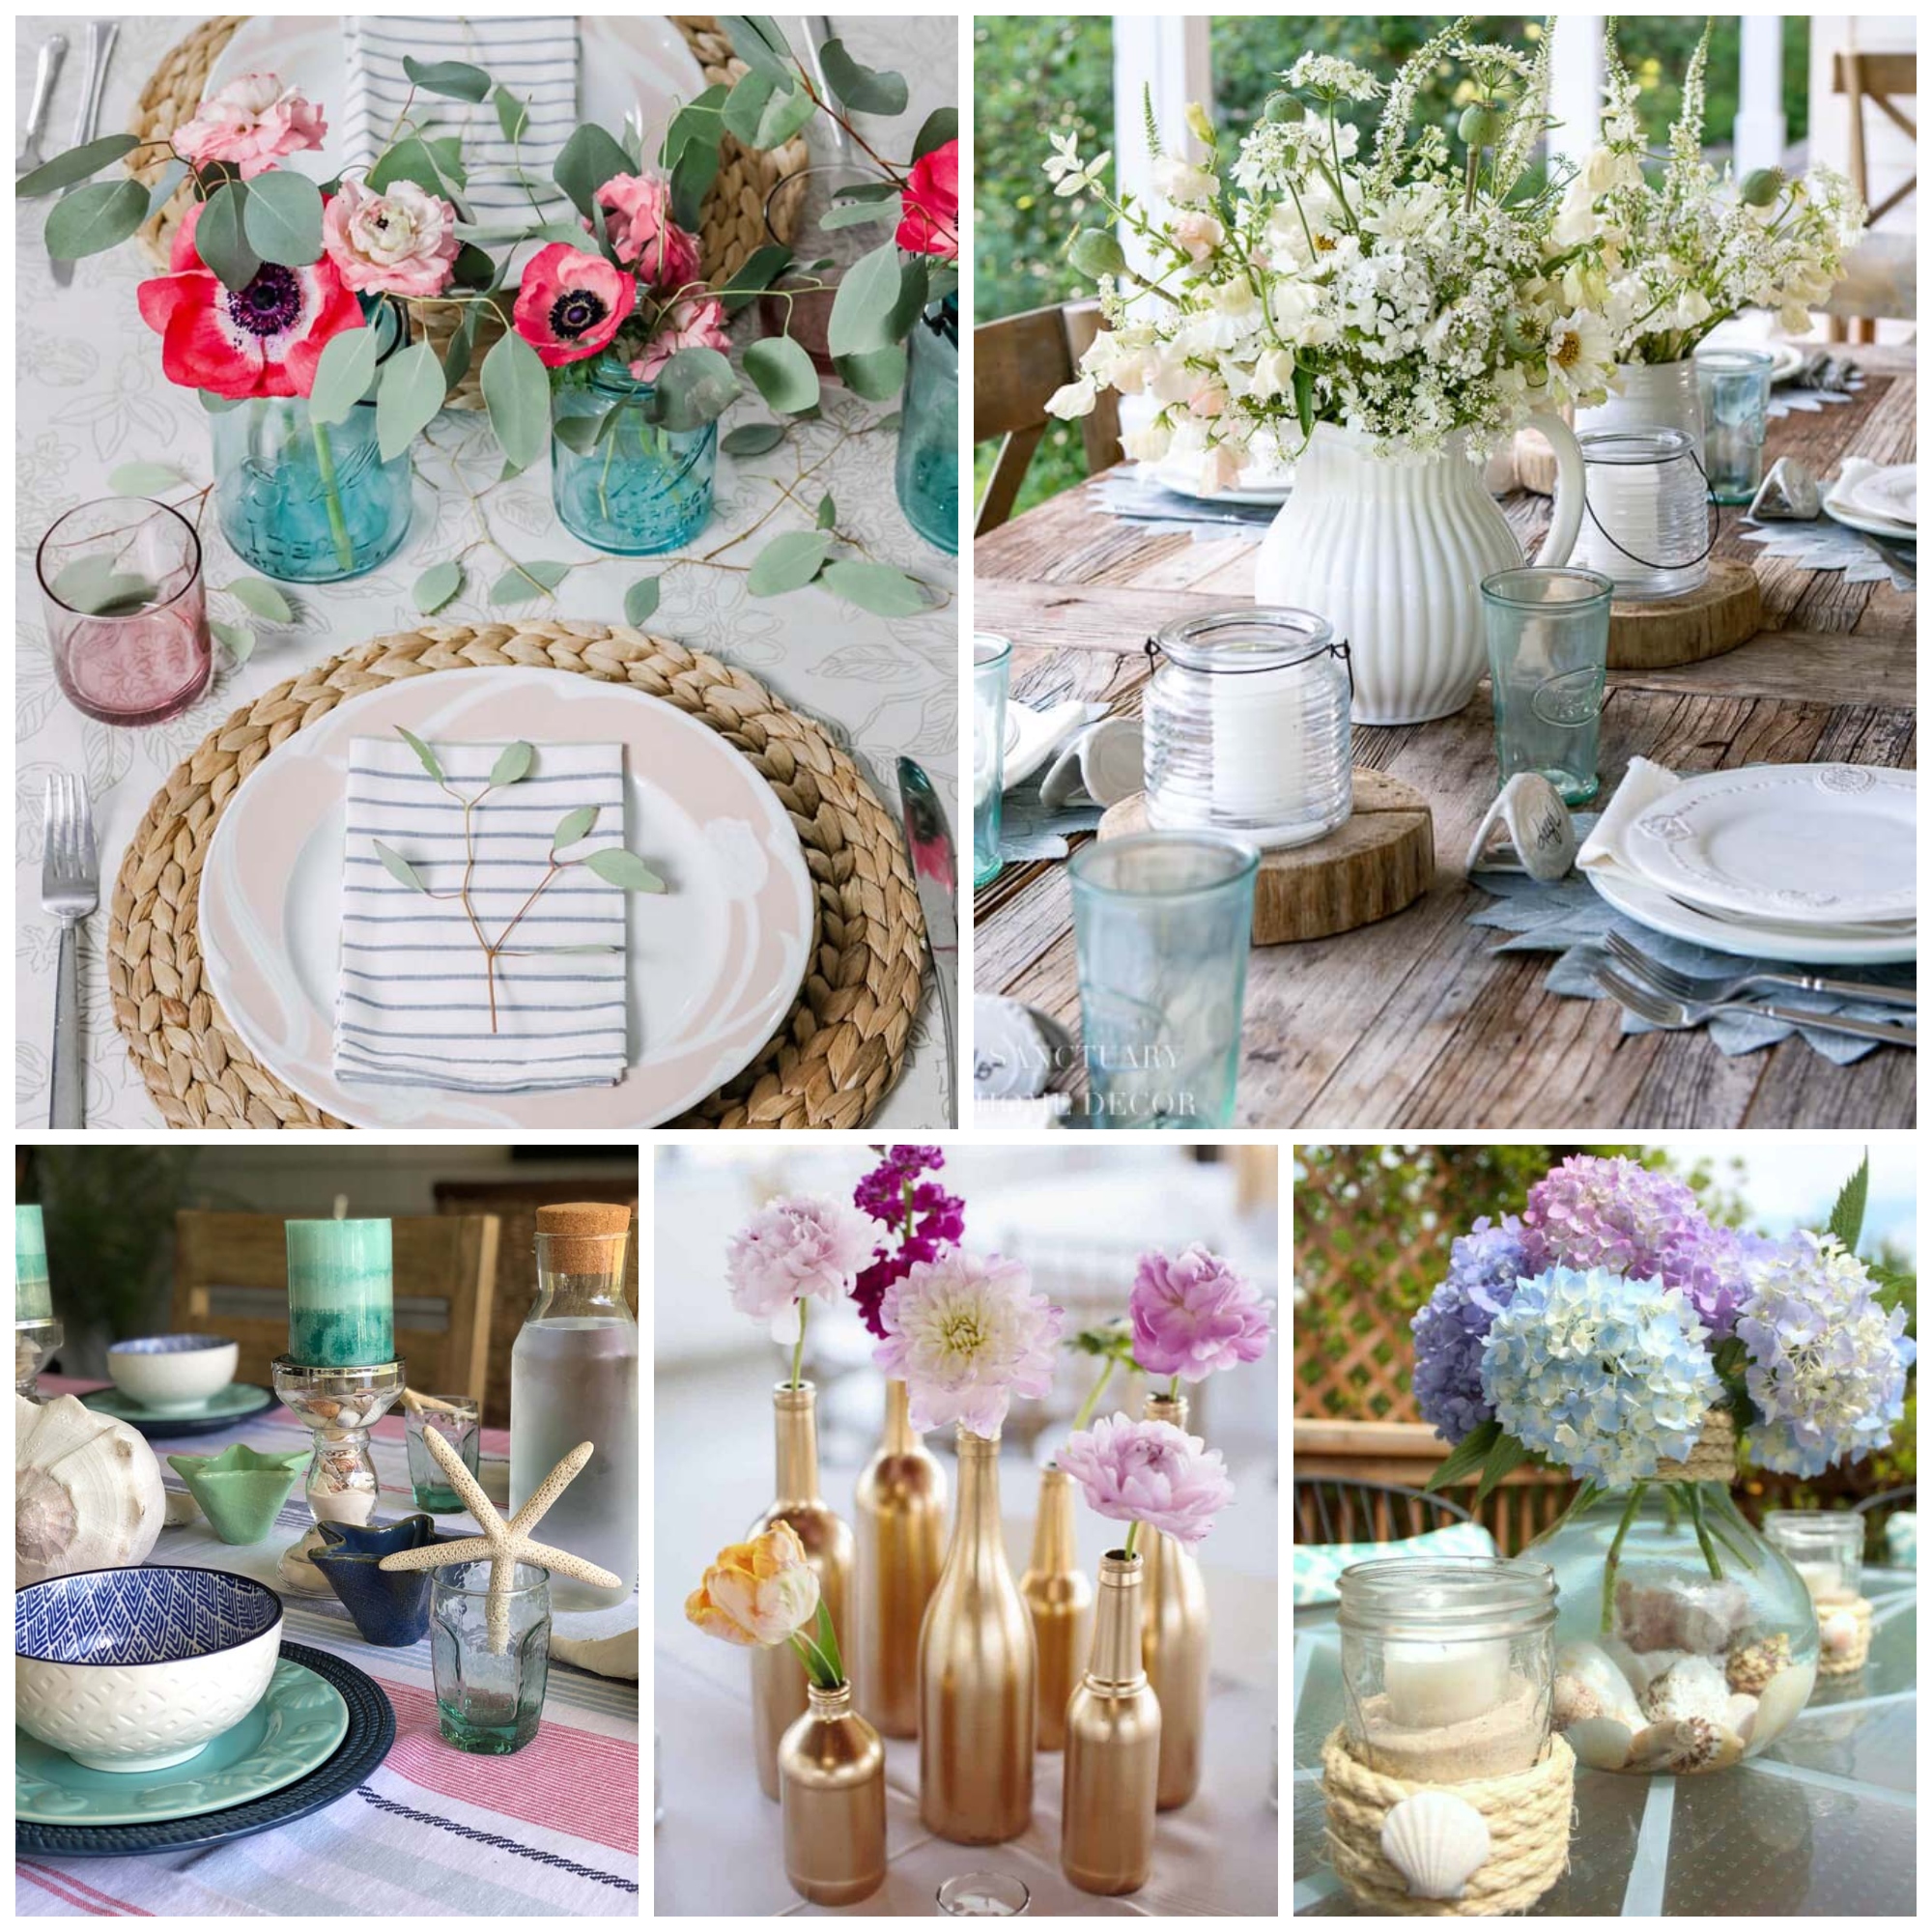 Stunnning Summer Table Decor Ideas To Brighten Your Home